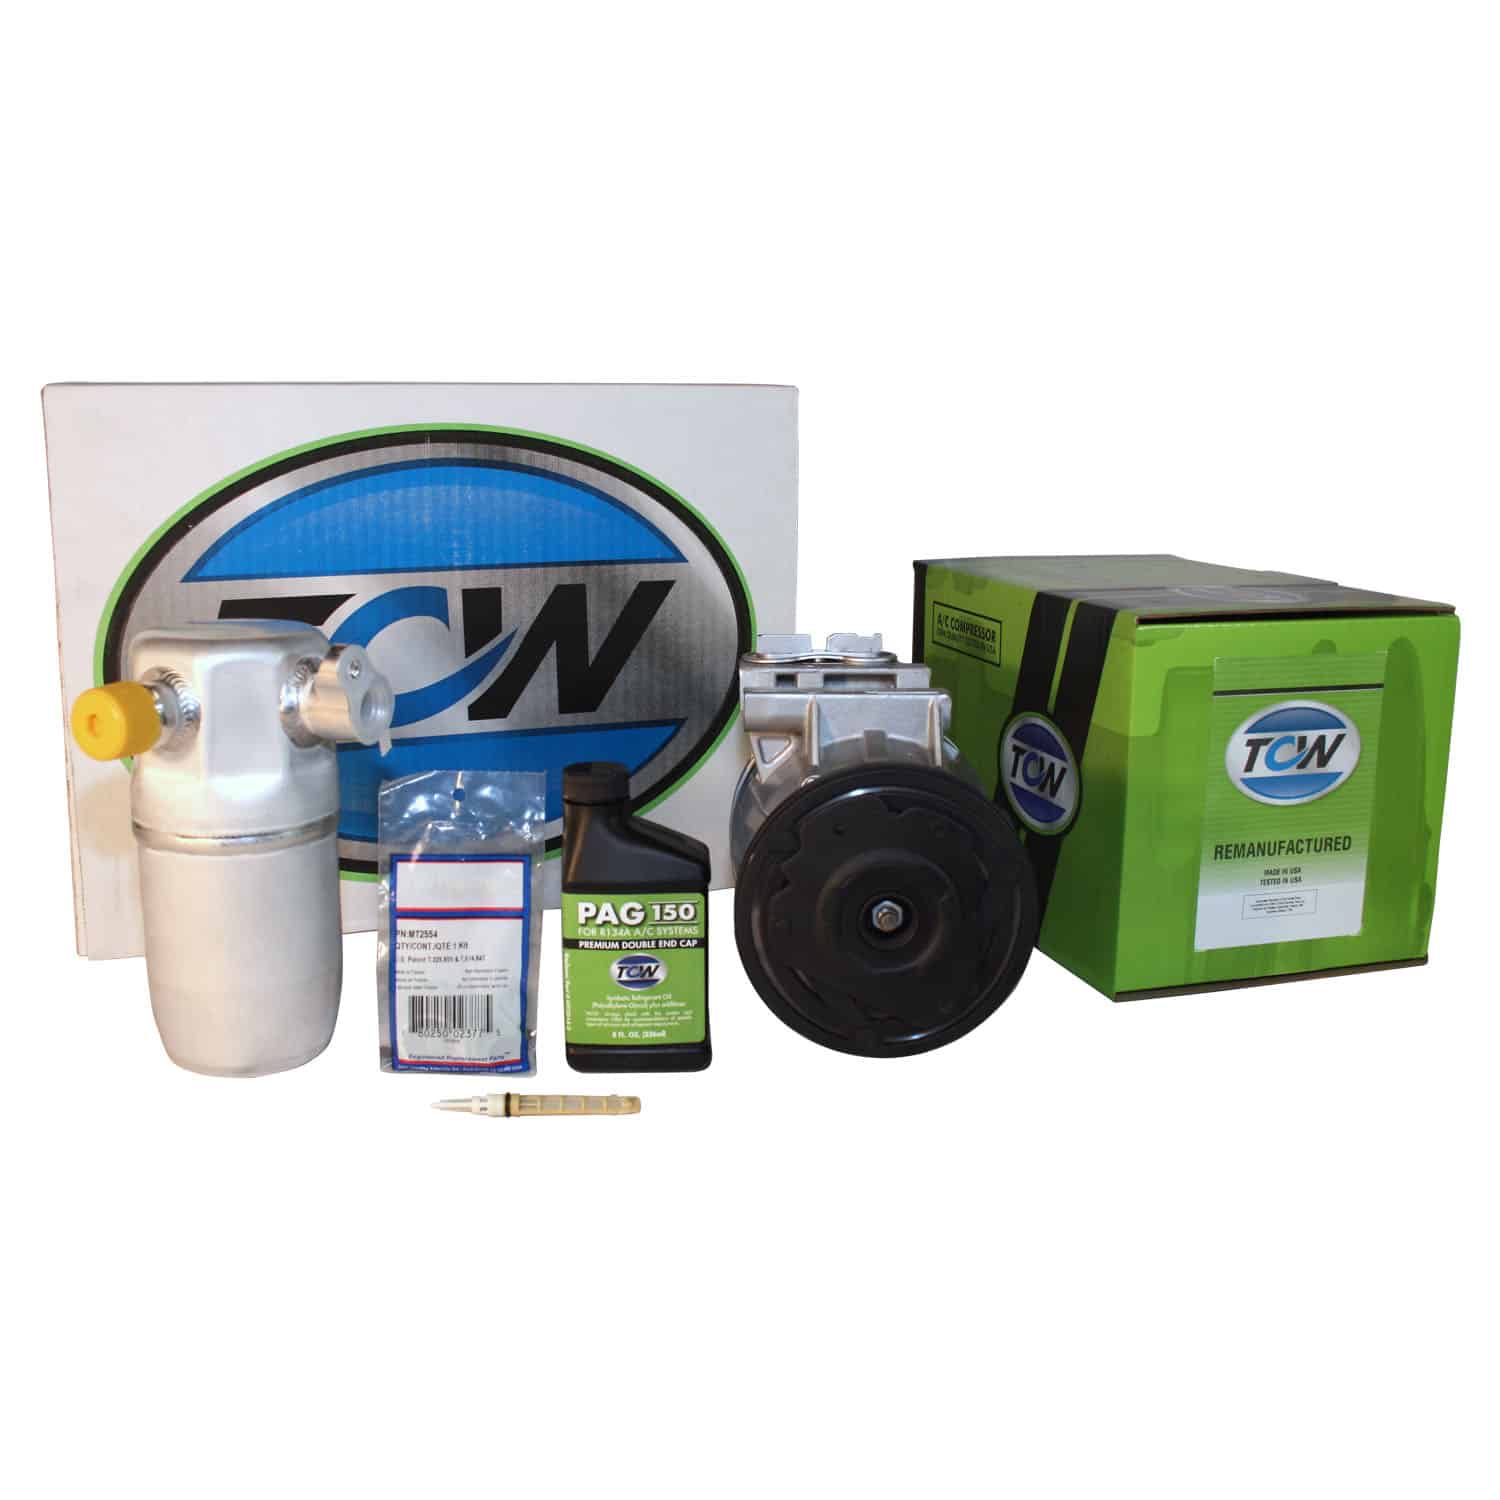 TCW Vehicle A/C Kit K1000362R Remanufactured